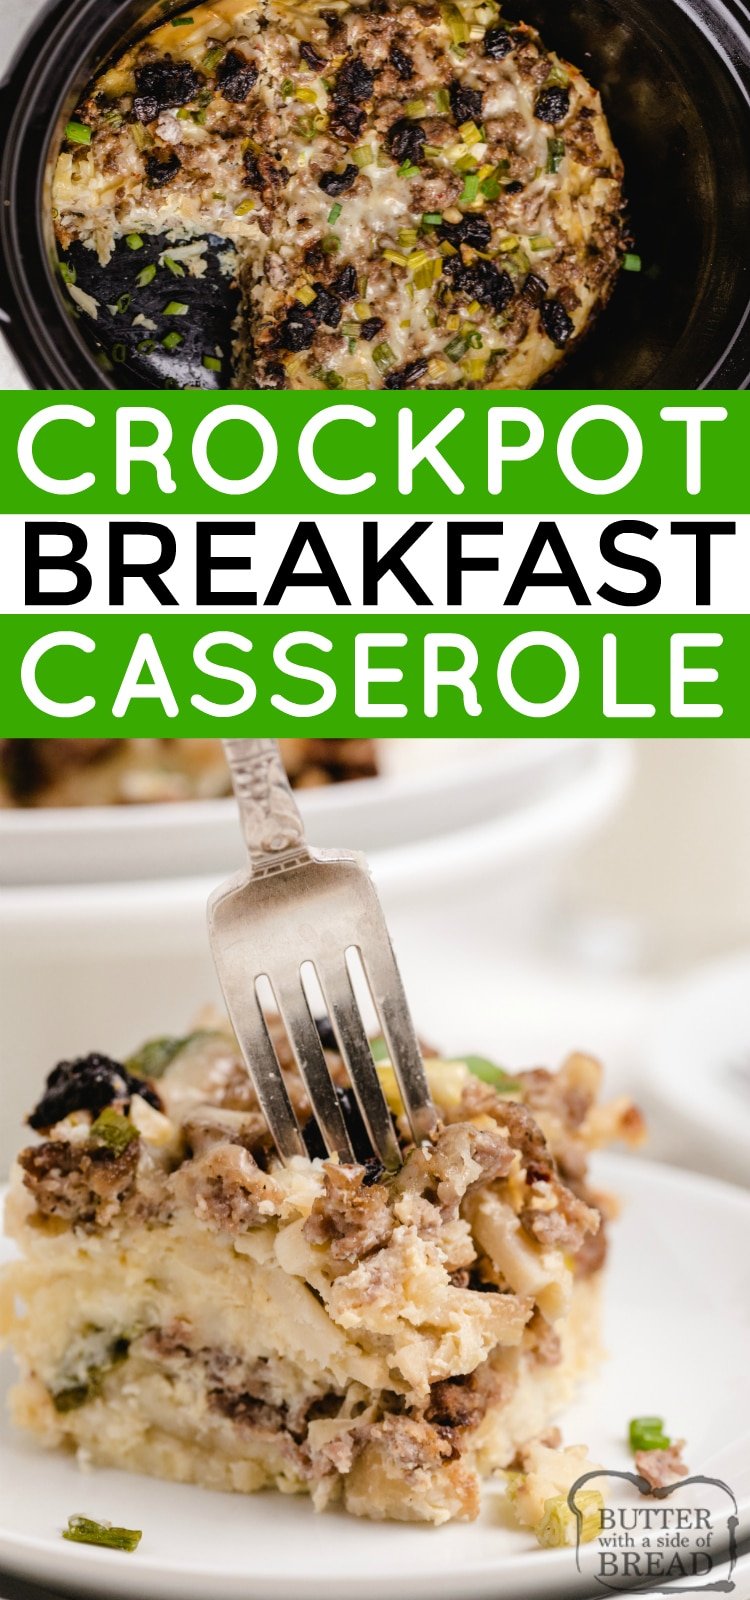 Crockpot Breakfast Casserole cooks overnight to be ready when you wake up in the morning!  Slow Cooker Breakfast casserole recipe is a high protein breakfast made with hash browns, sausage, cheese, eggs and veggies.